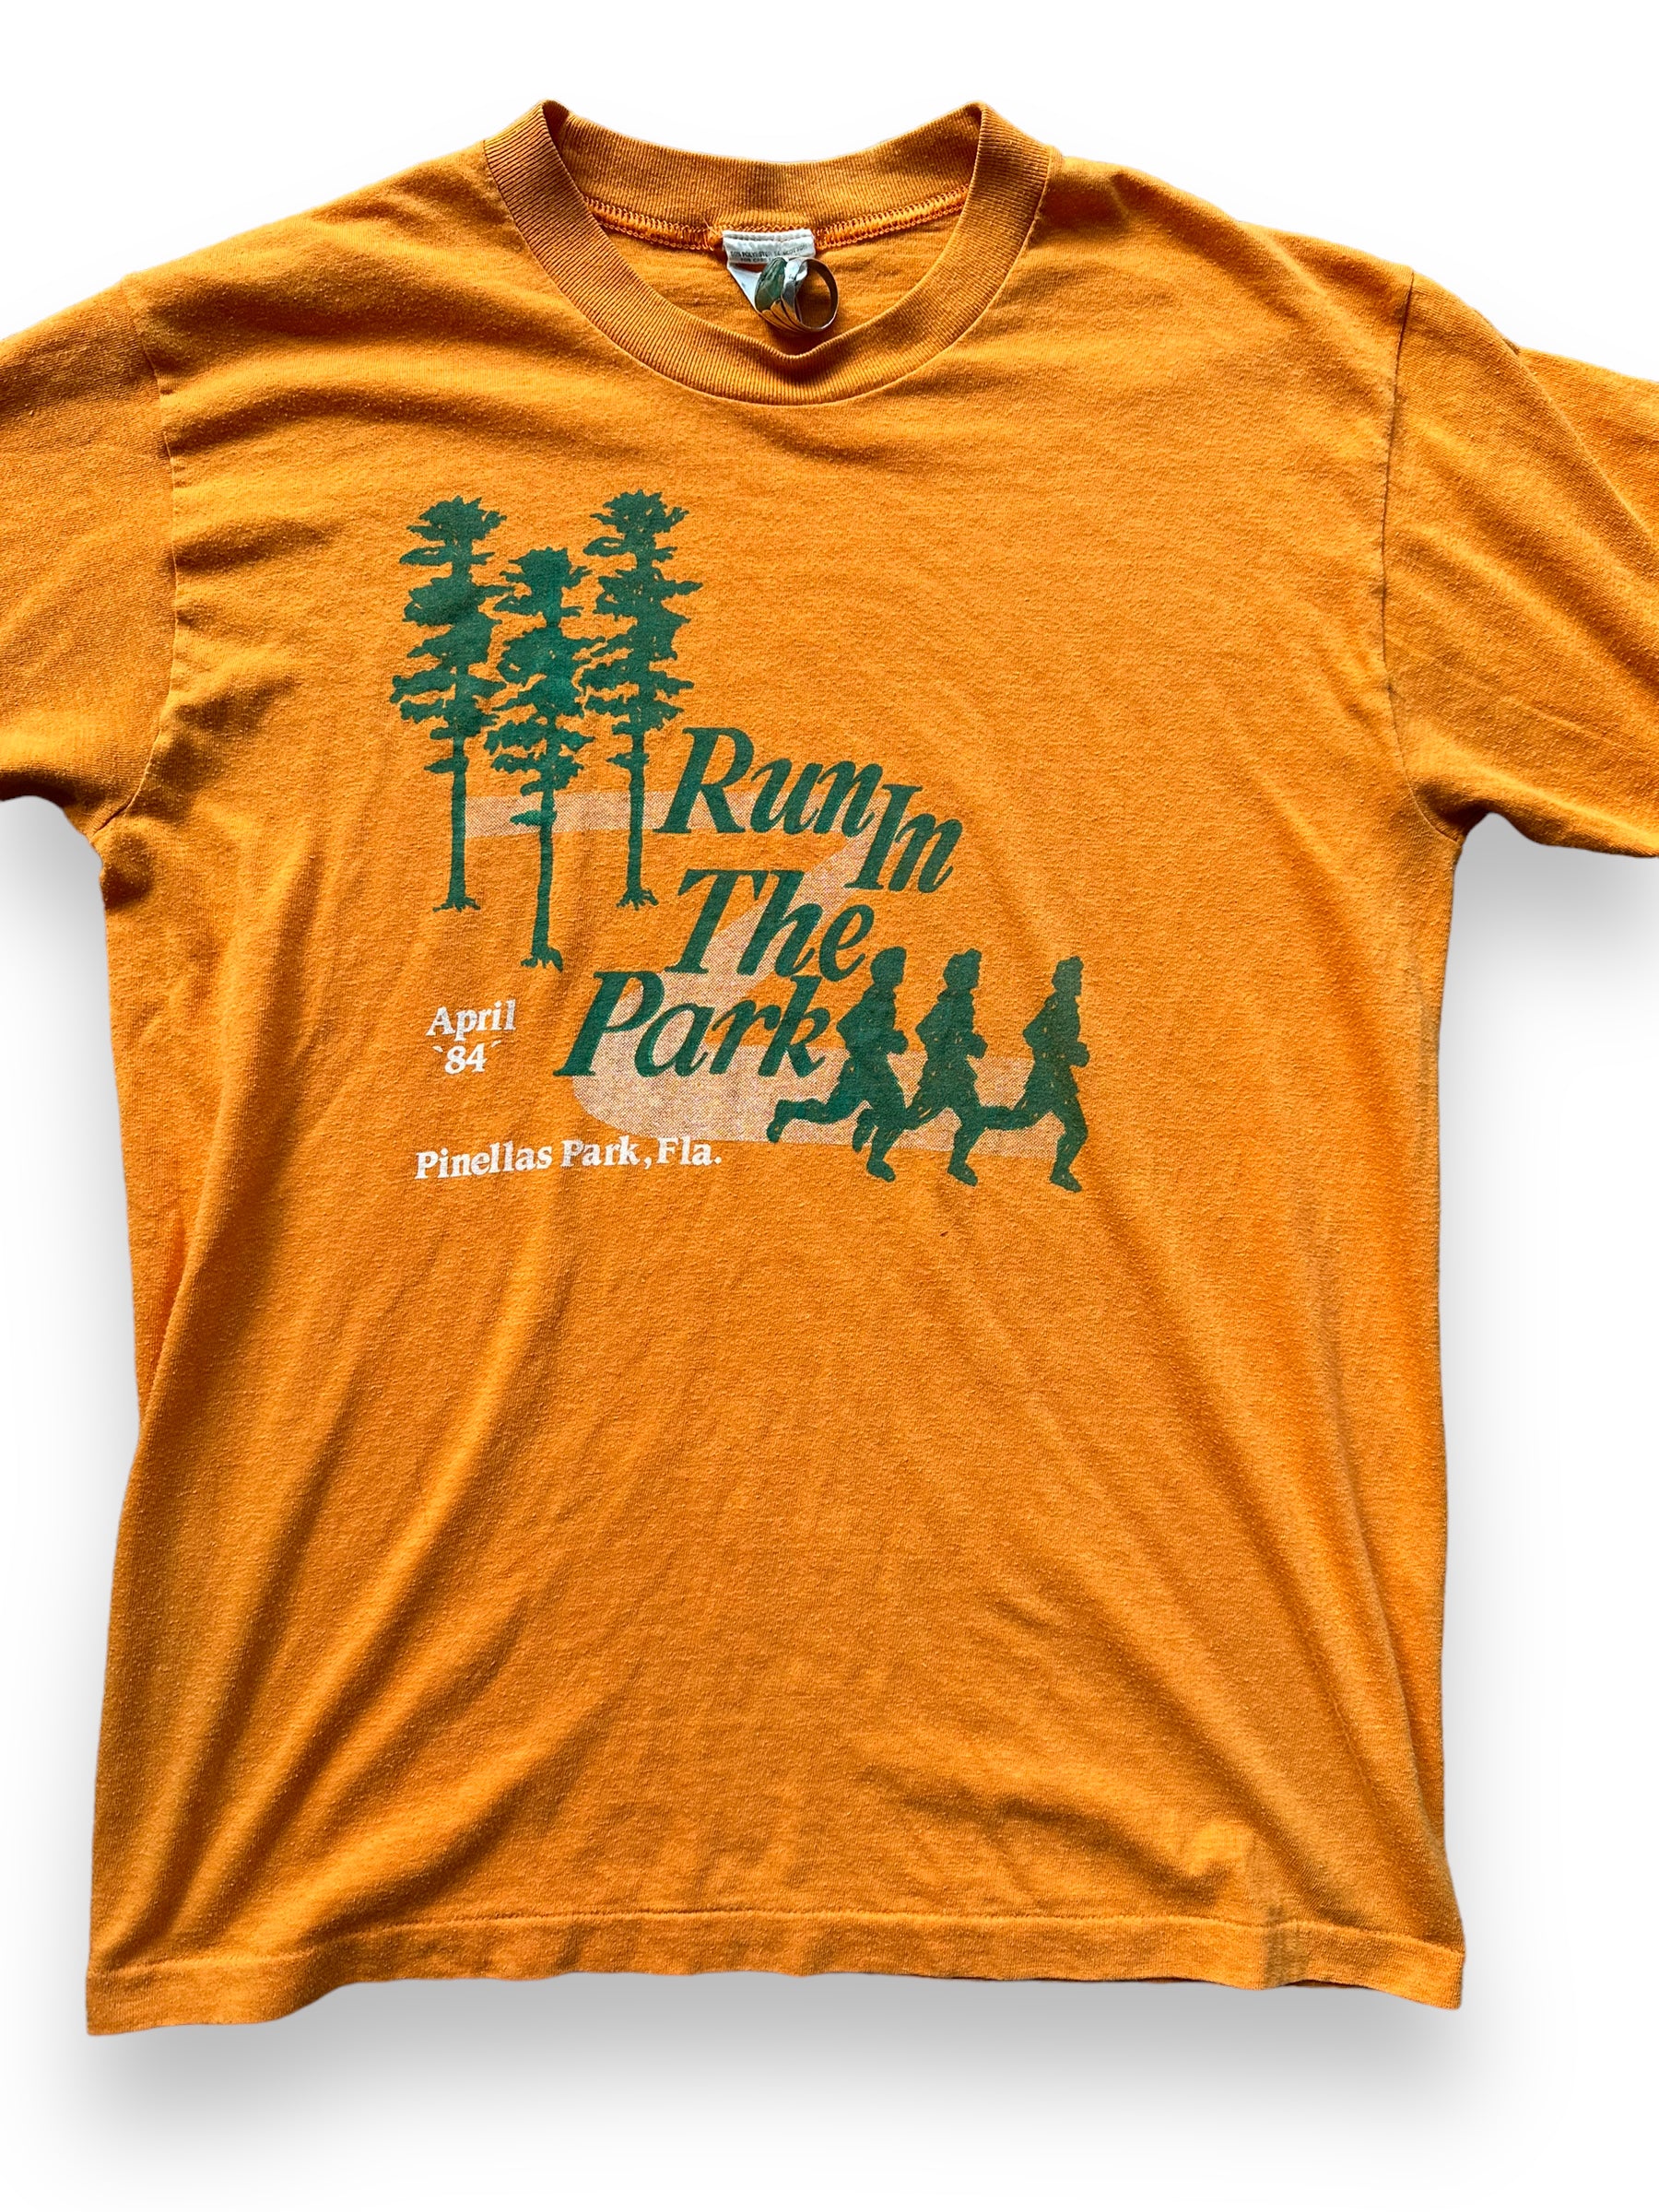 Front Detail on 1984 Run in the Park Tee SZ L | Vintage Graphic T-Shirts Seattle | Barn Owl Vintage Tees Seattle